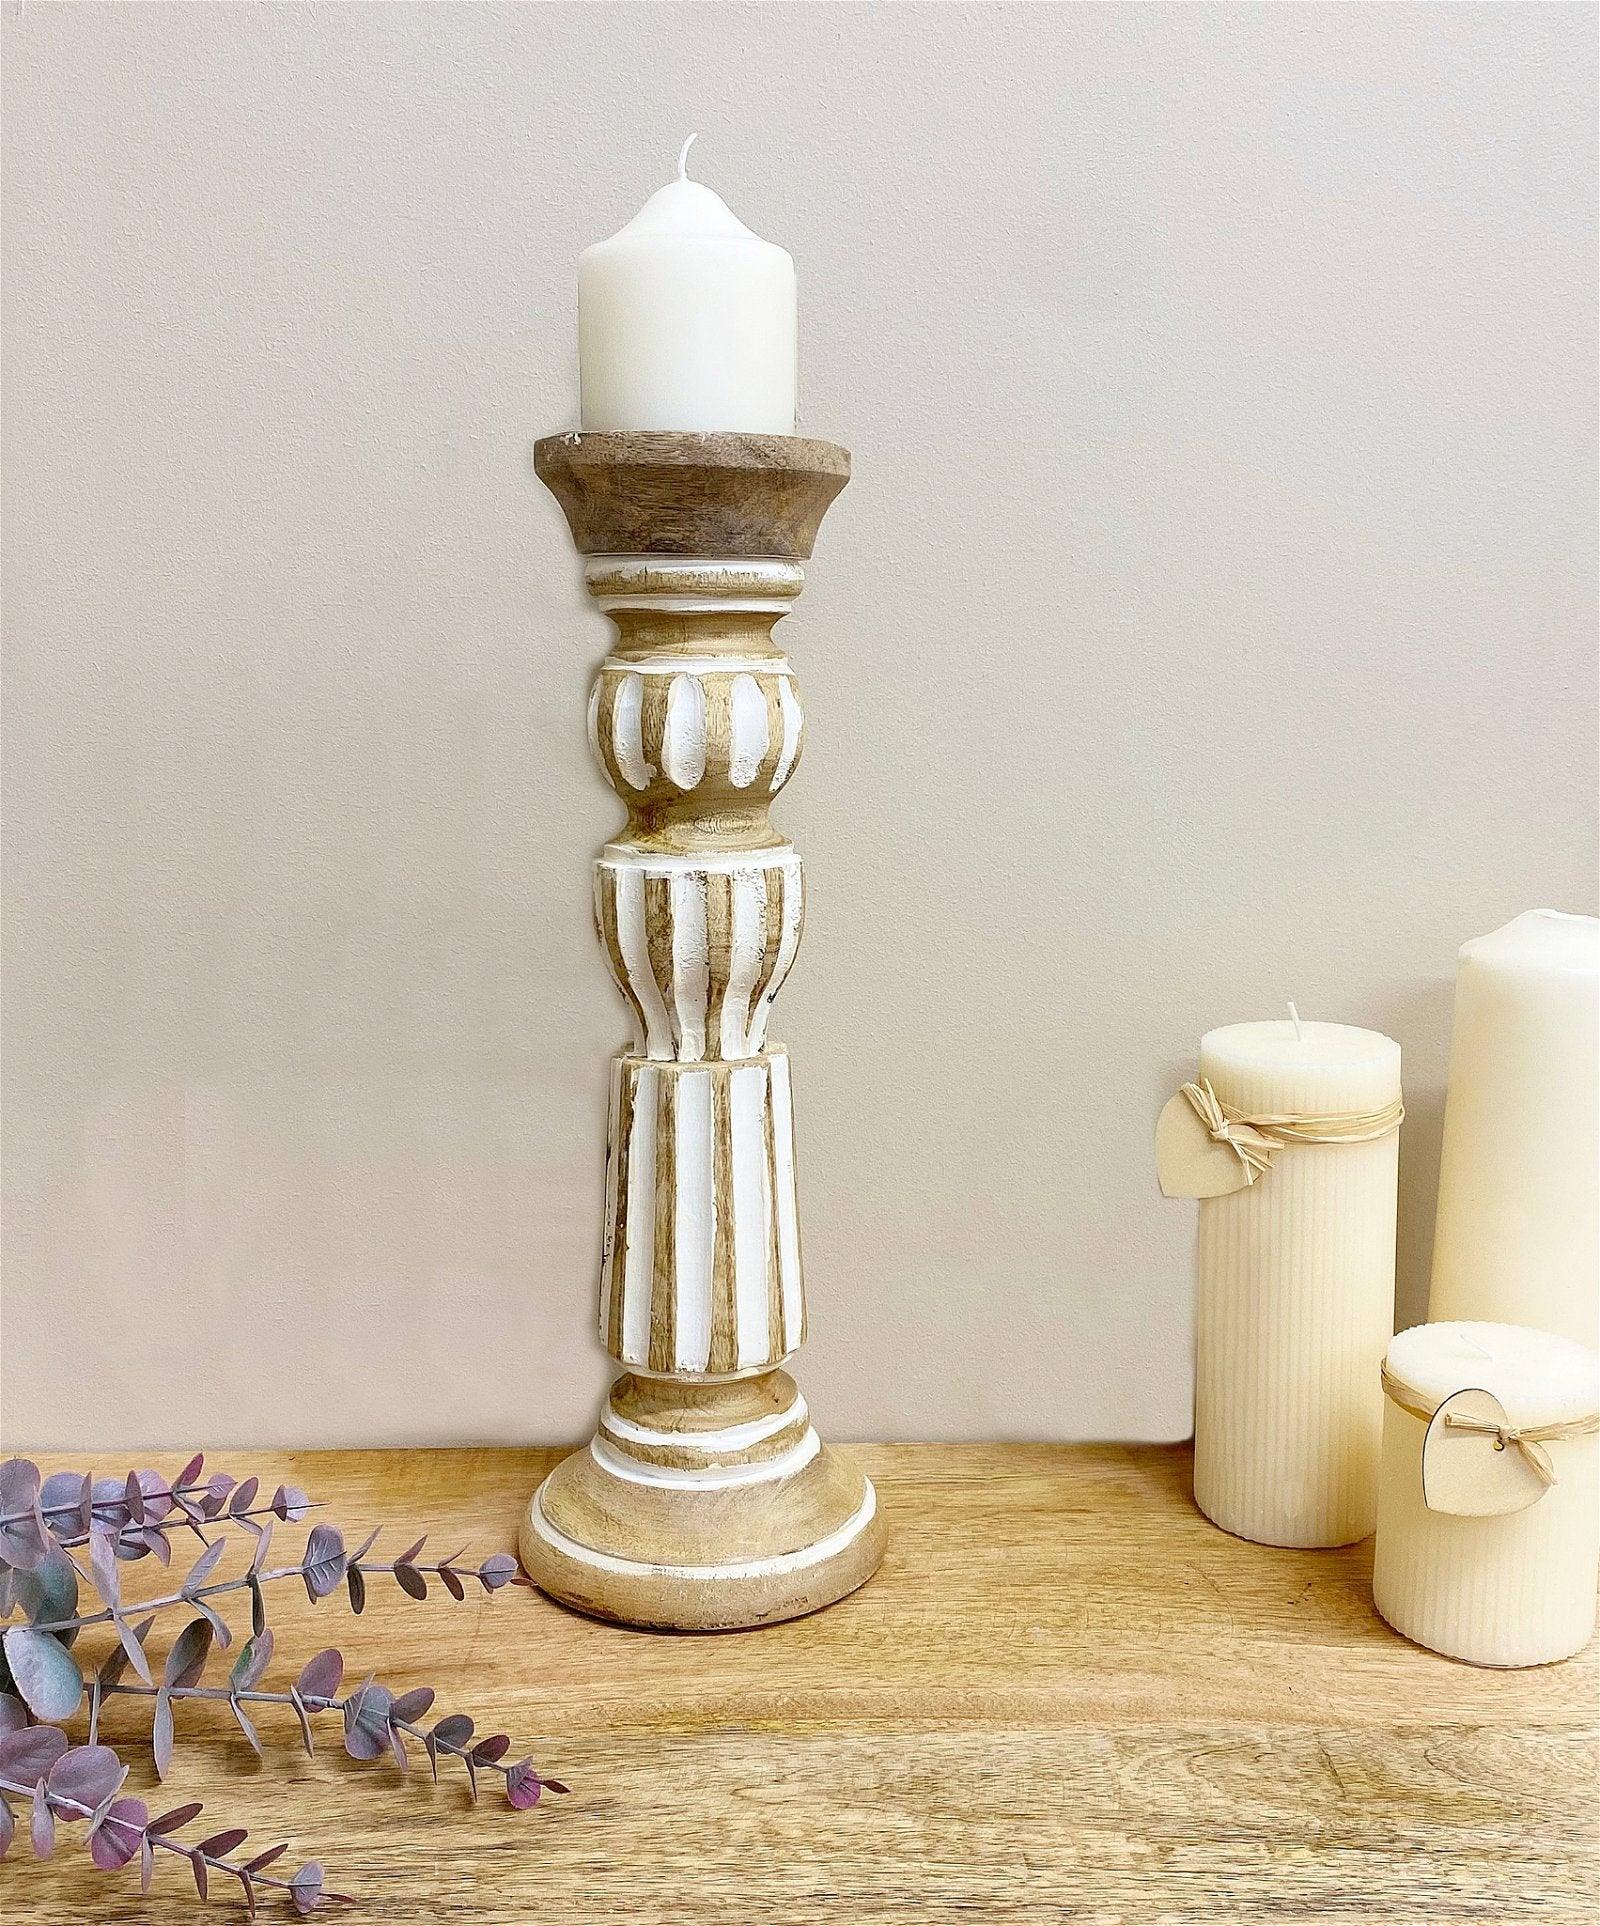 Wooden Candle Stick 38cm - £34.99 - 